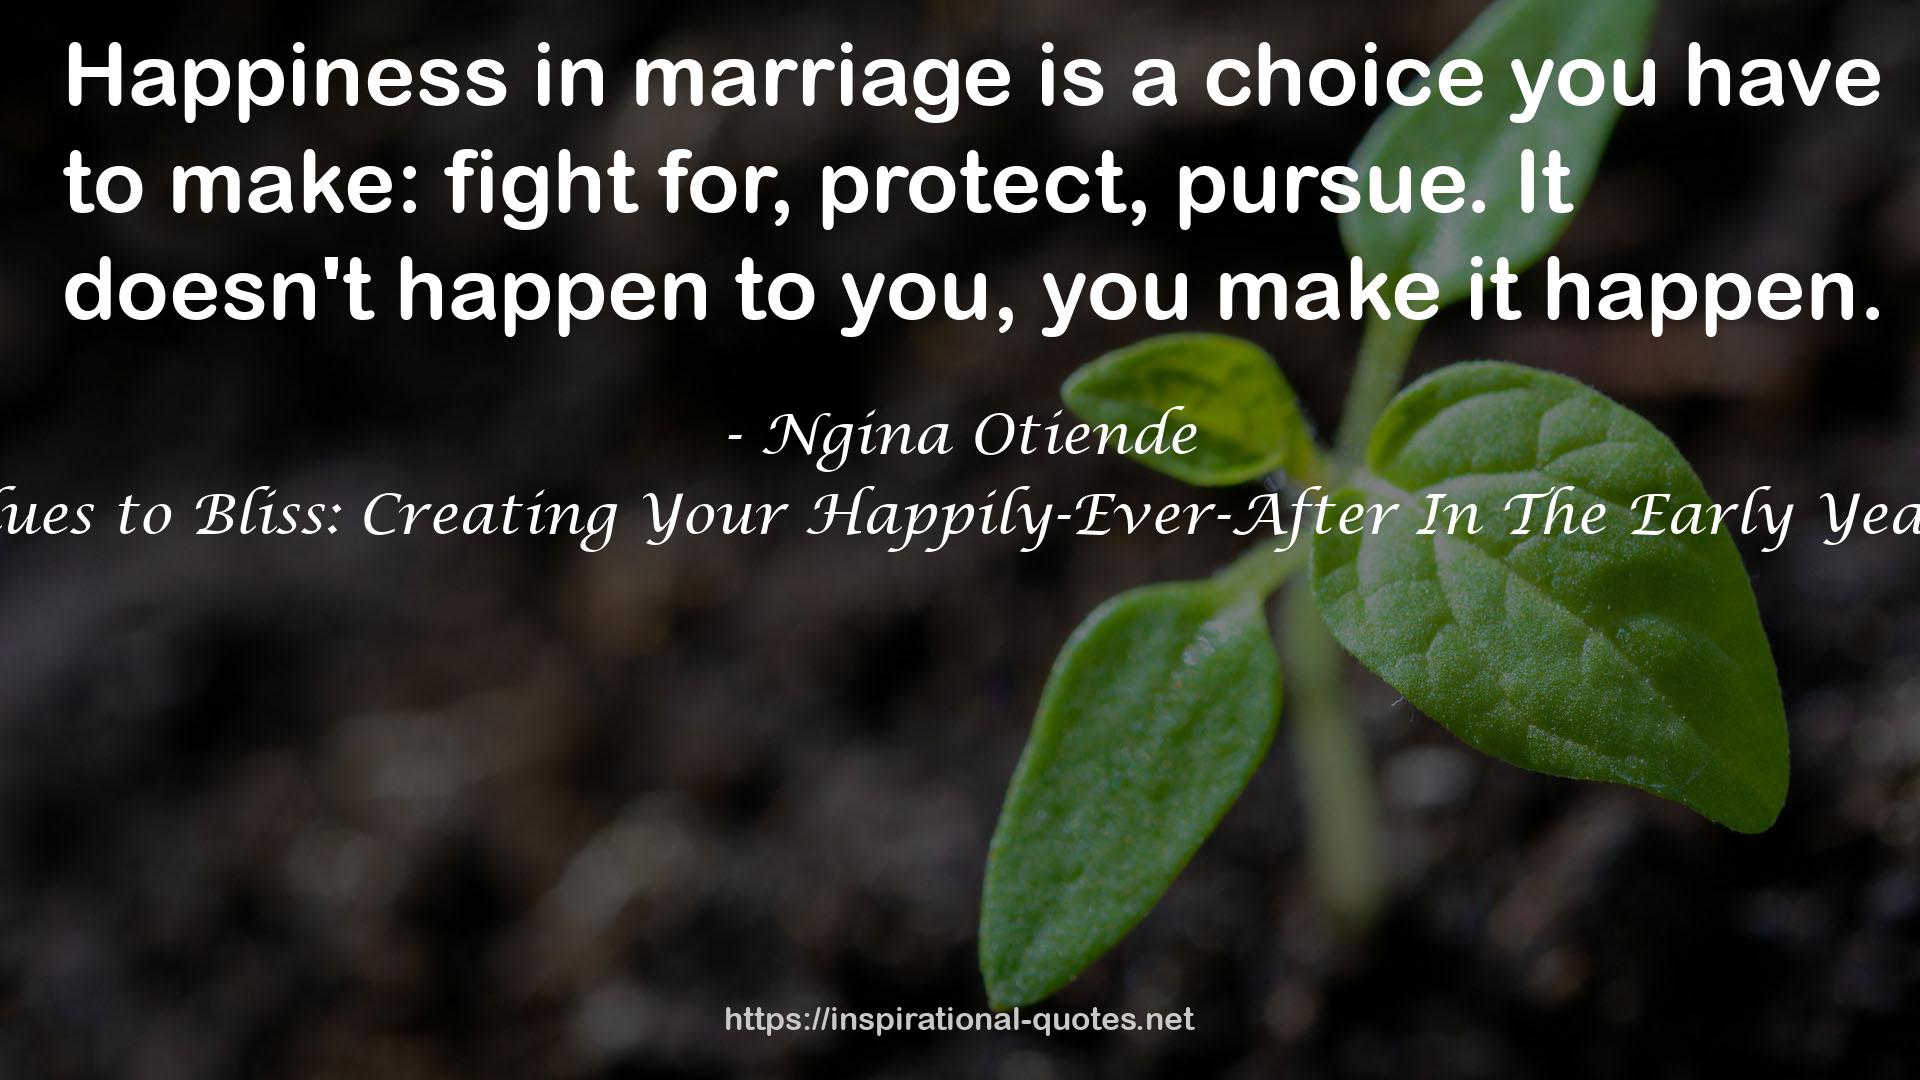 Blues to Bliss: Creating Your Happily-Ever-After In The Early Years QUOTES